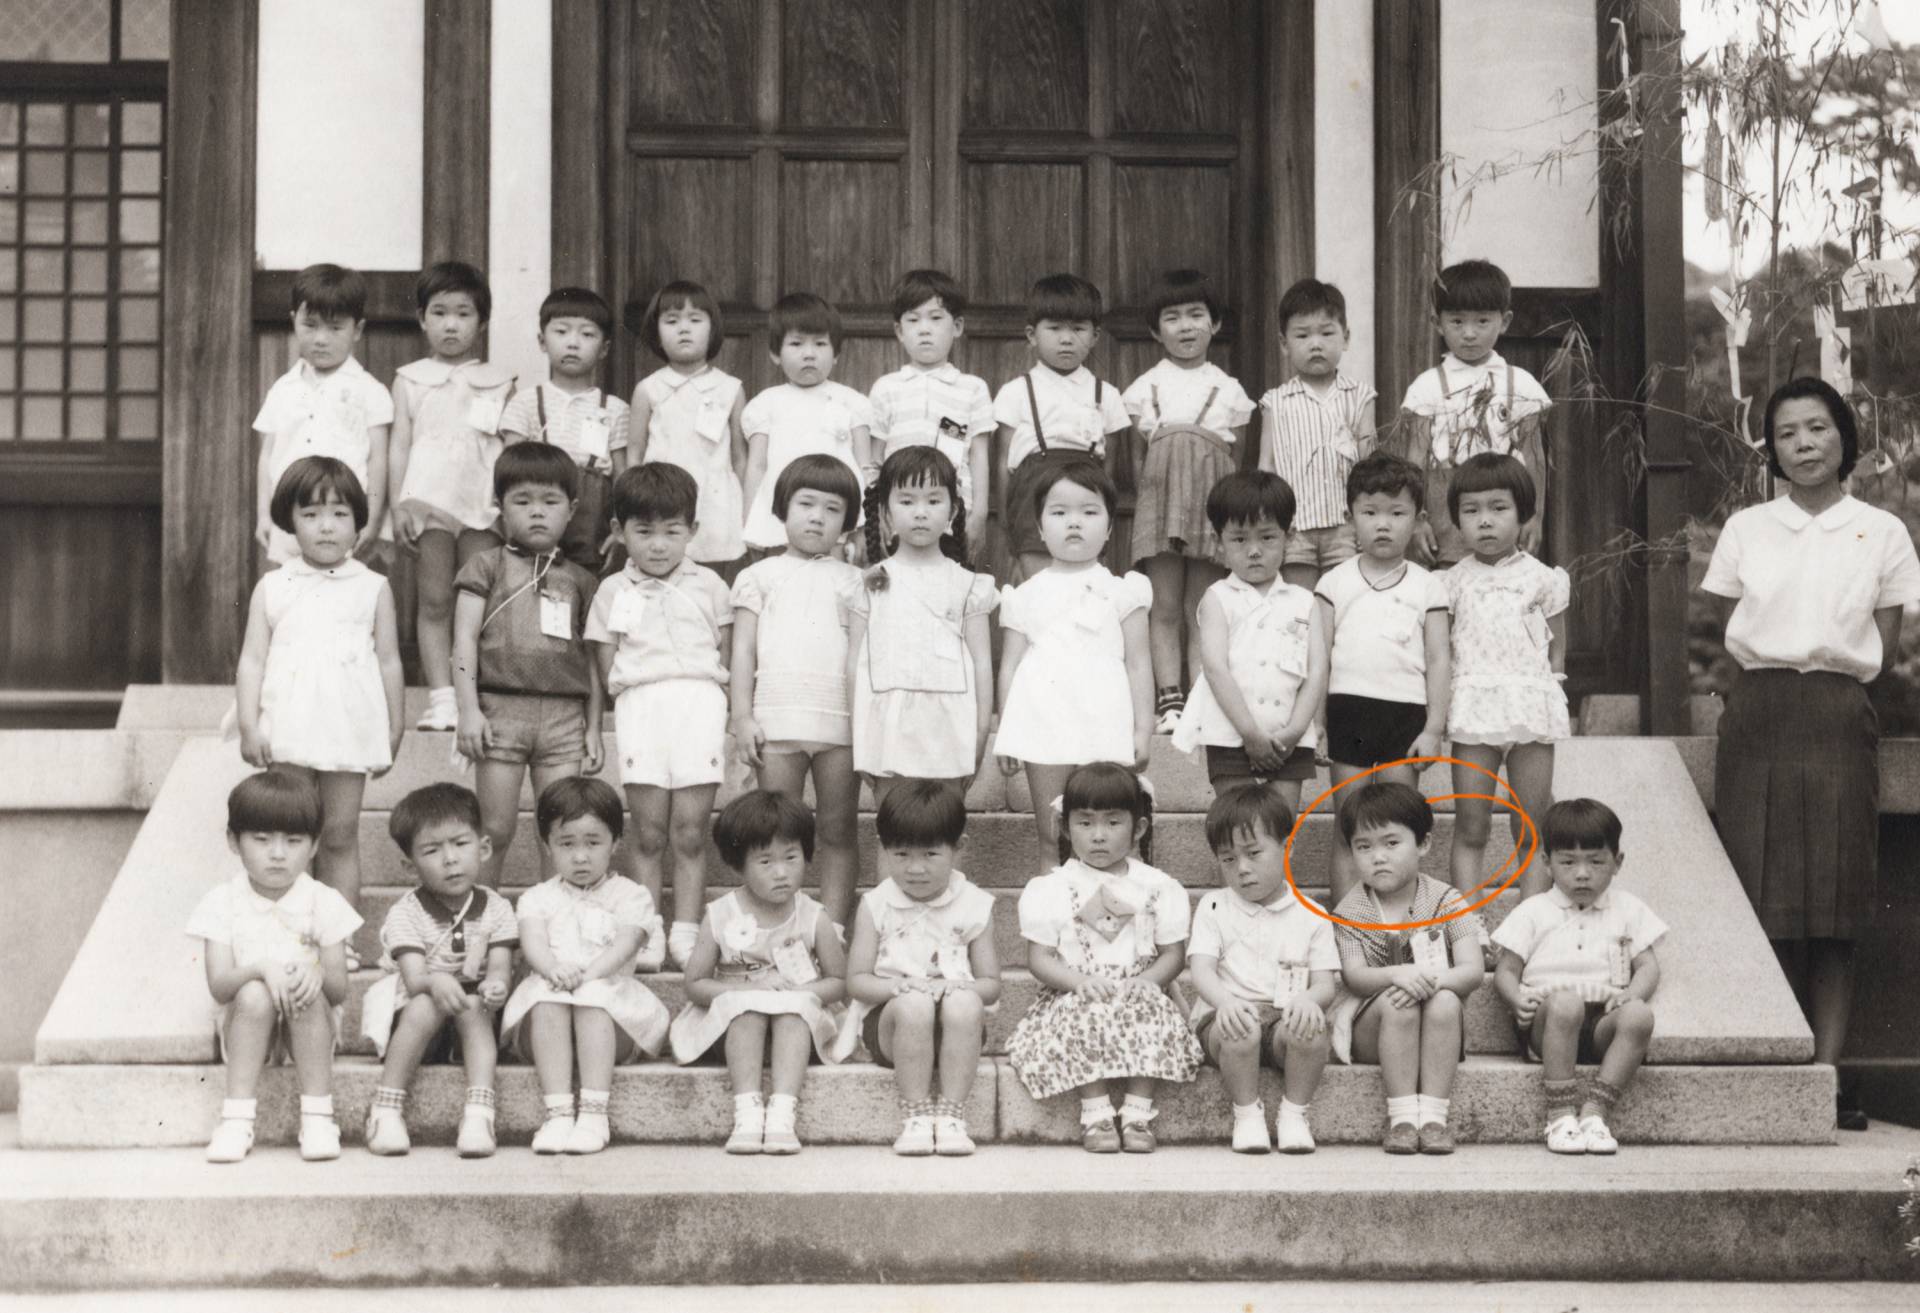 Akiyama (bottom row, second from right) with her kindergarten class in the city of Nara, Japan.